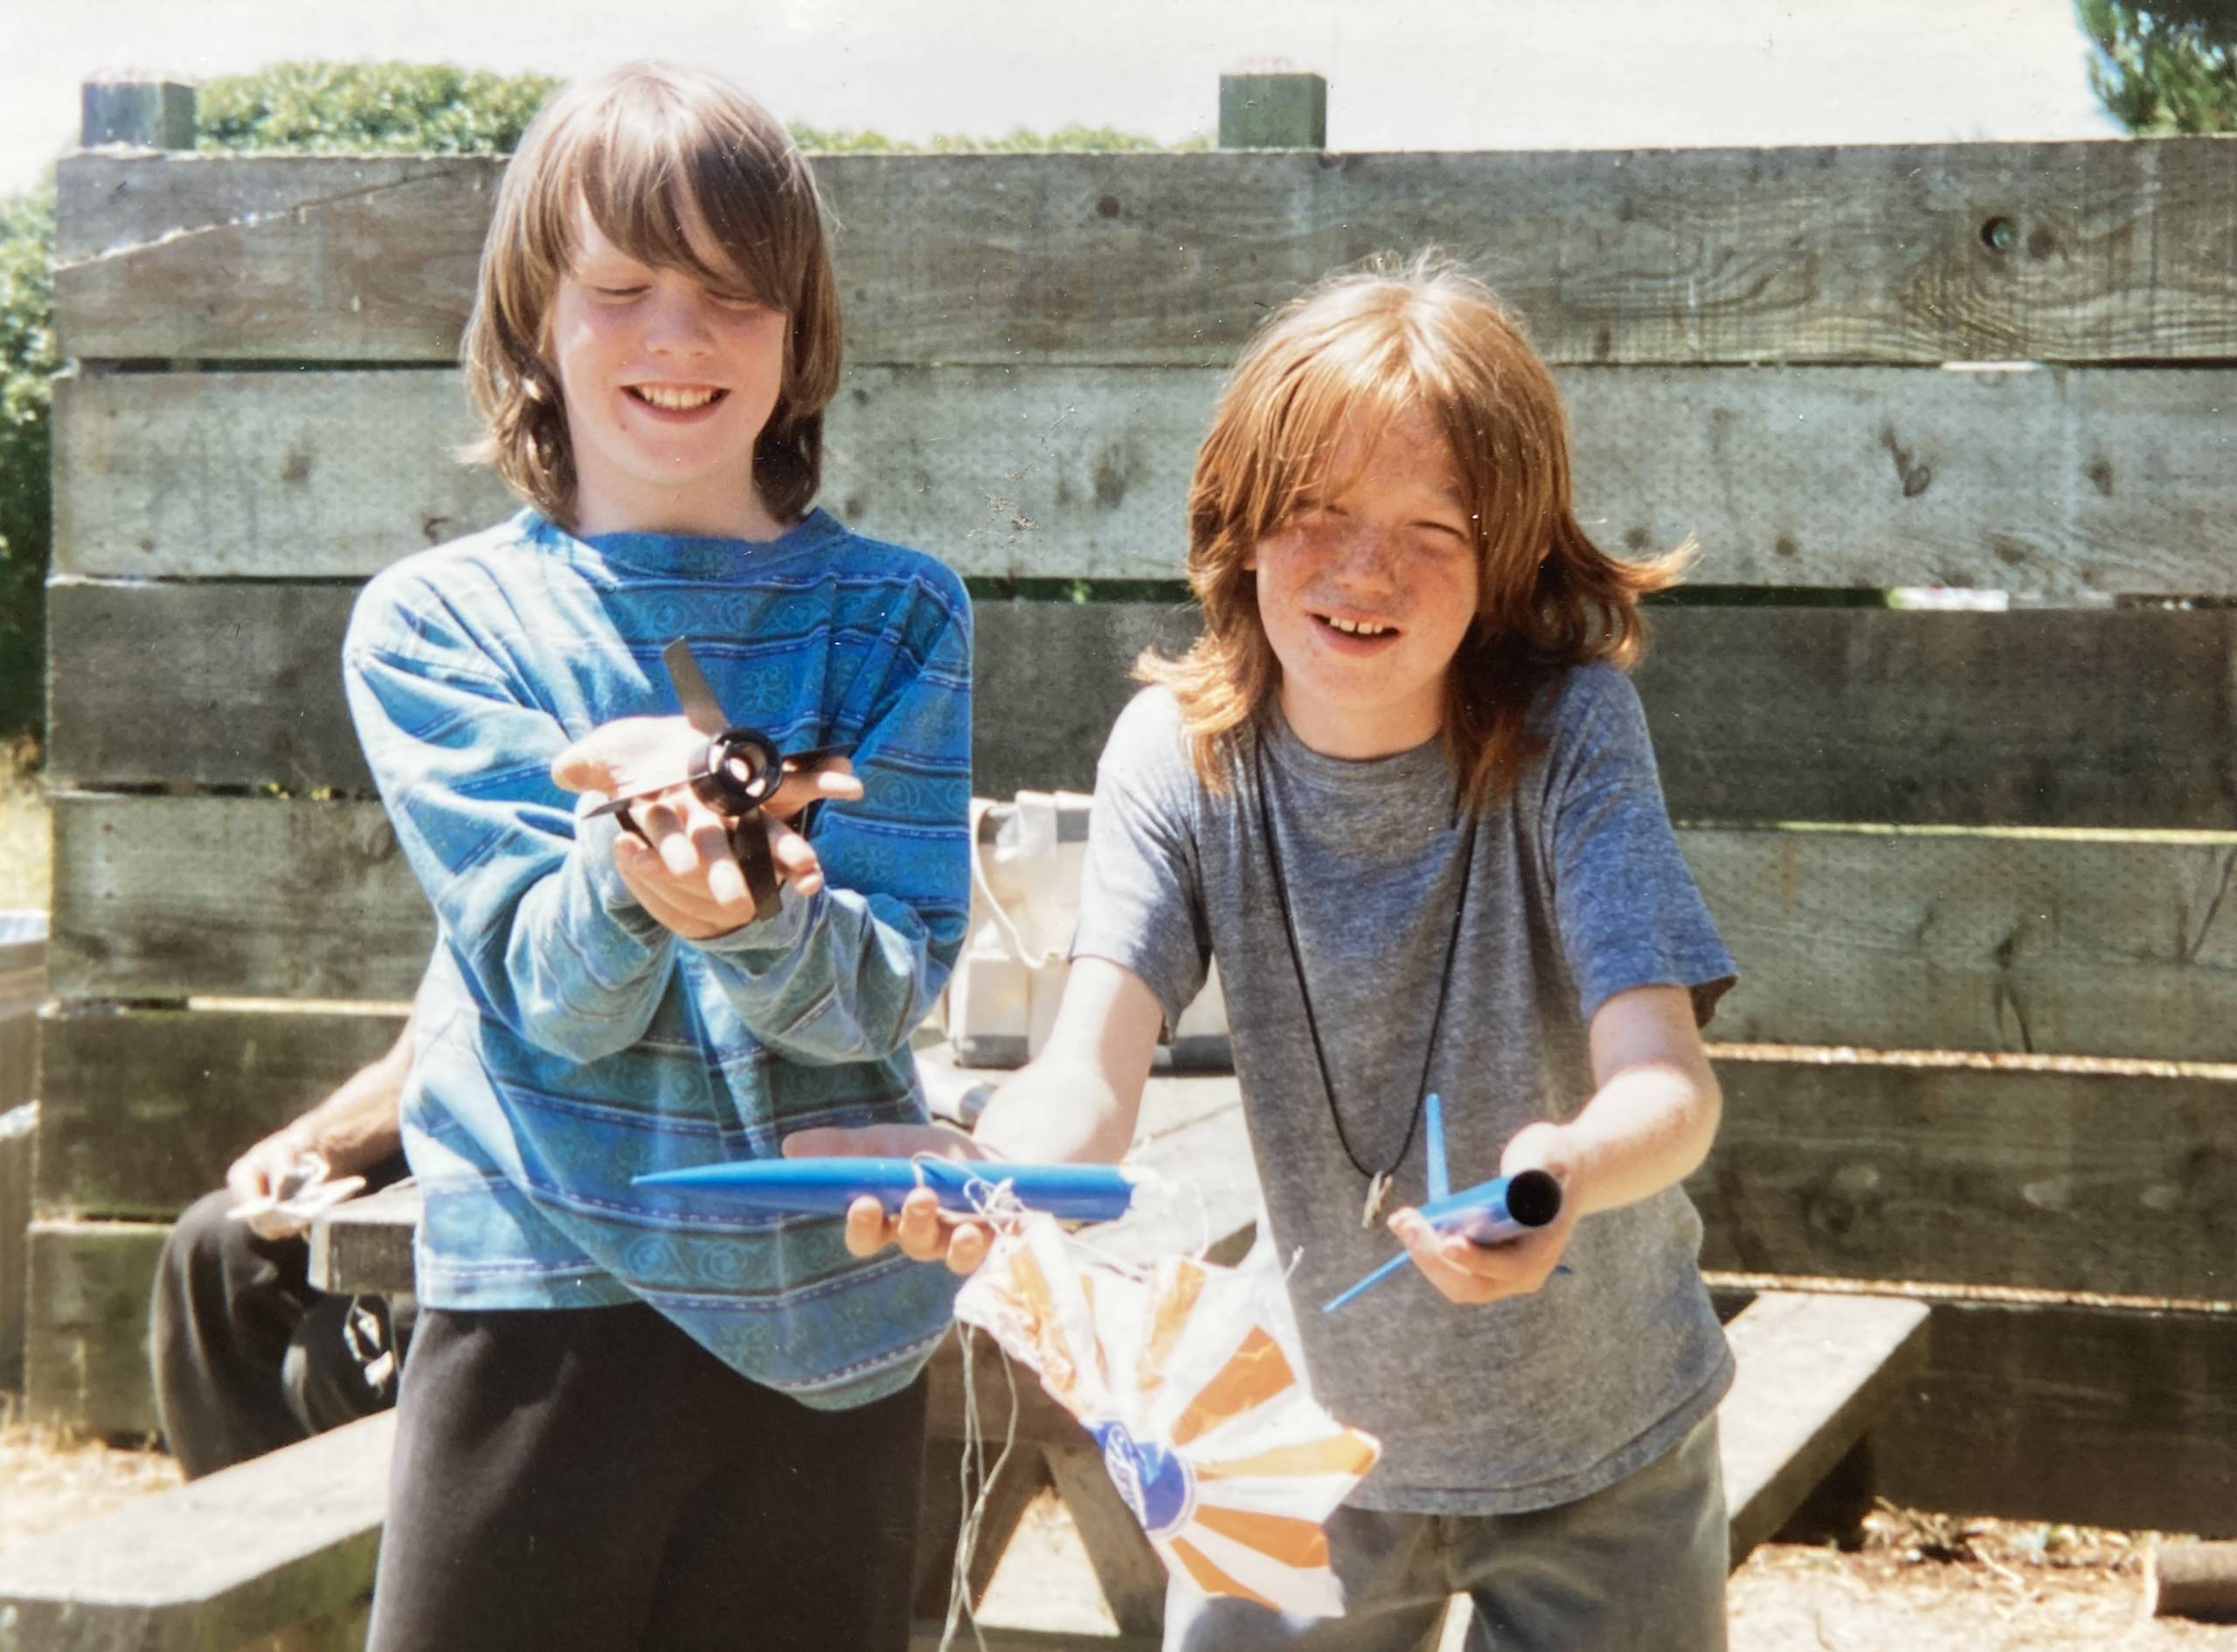 Two boys grin as they show off toy airplanes in an outdoor setting.